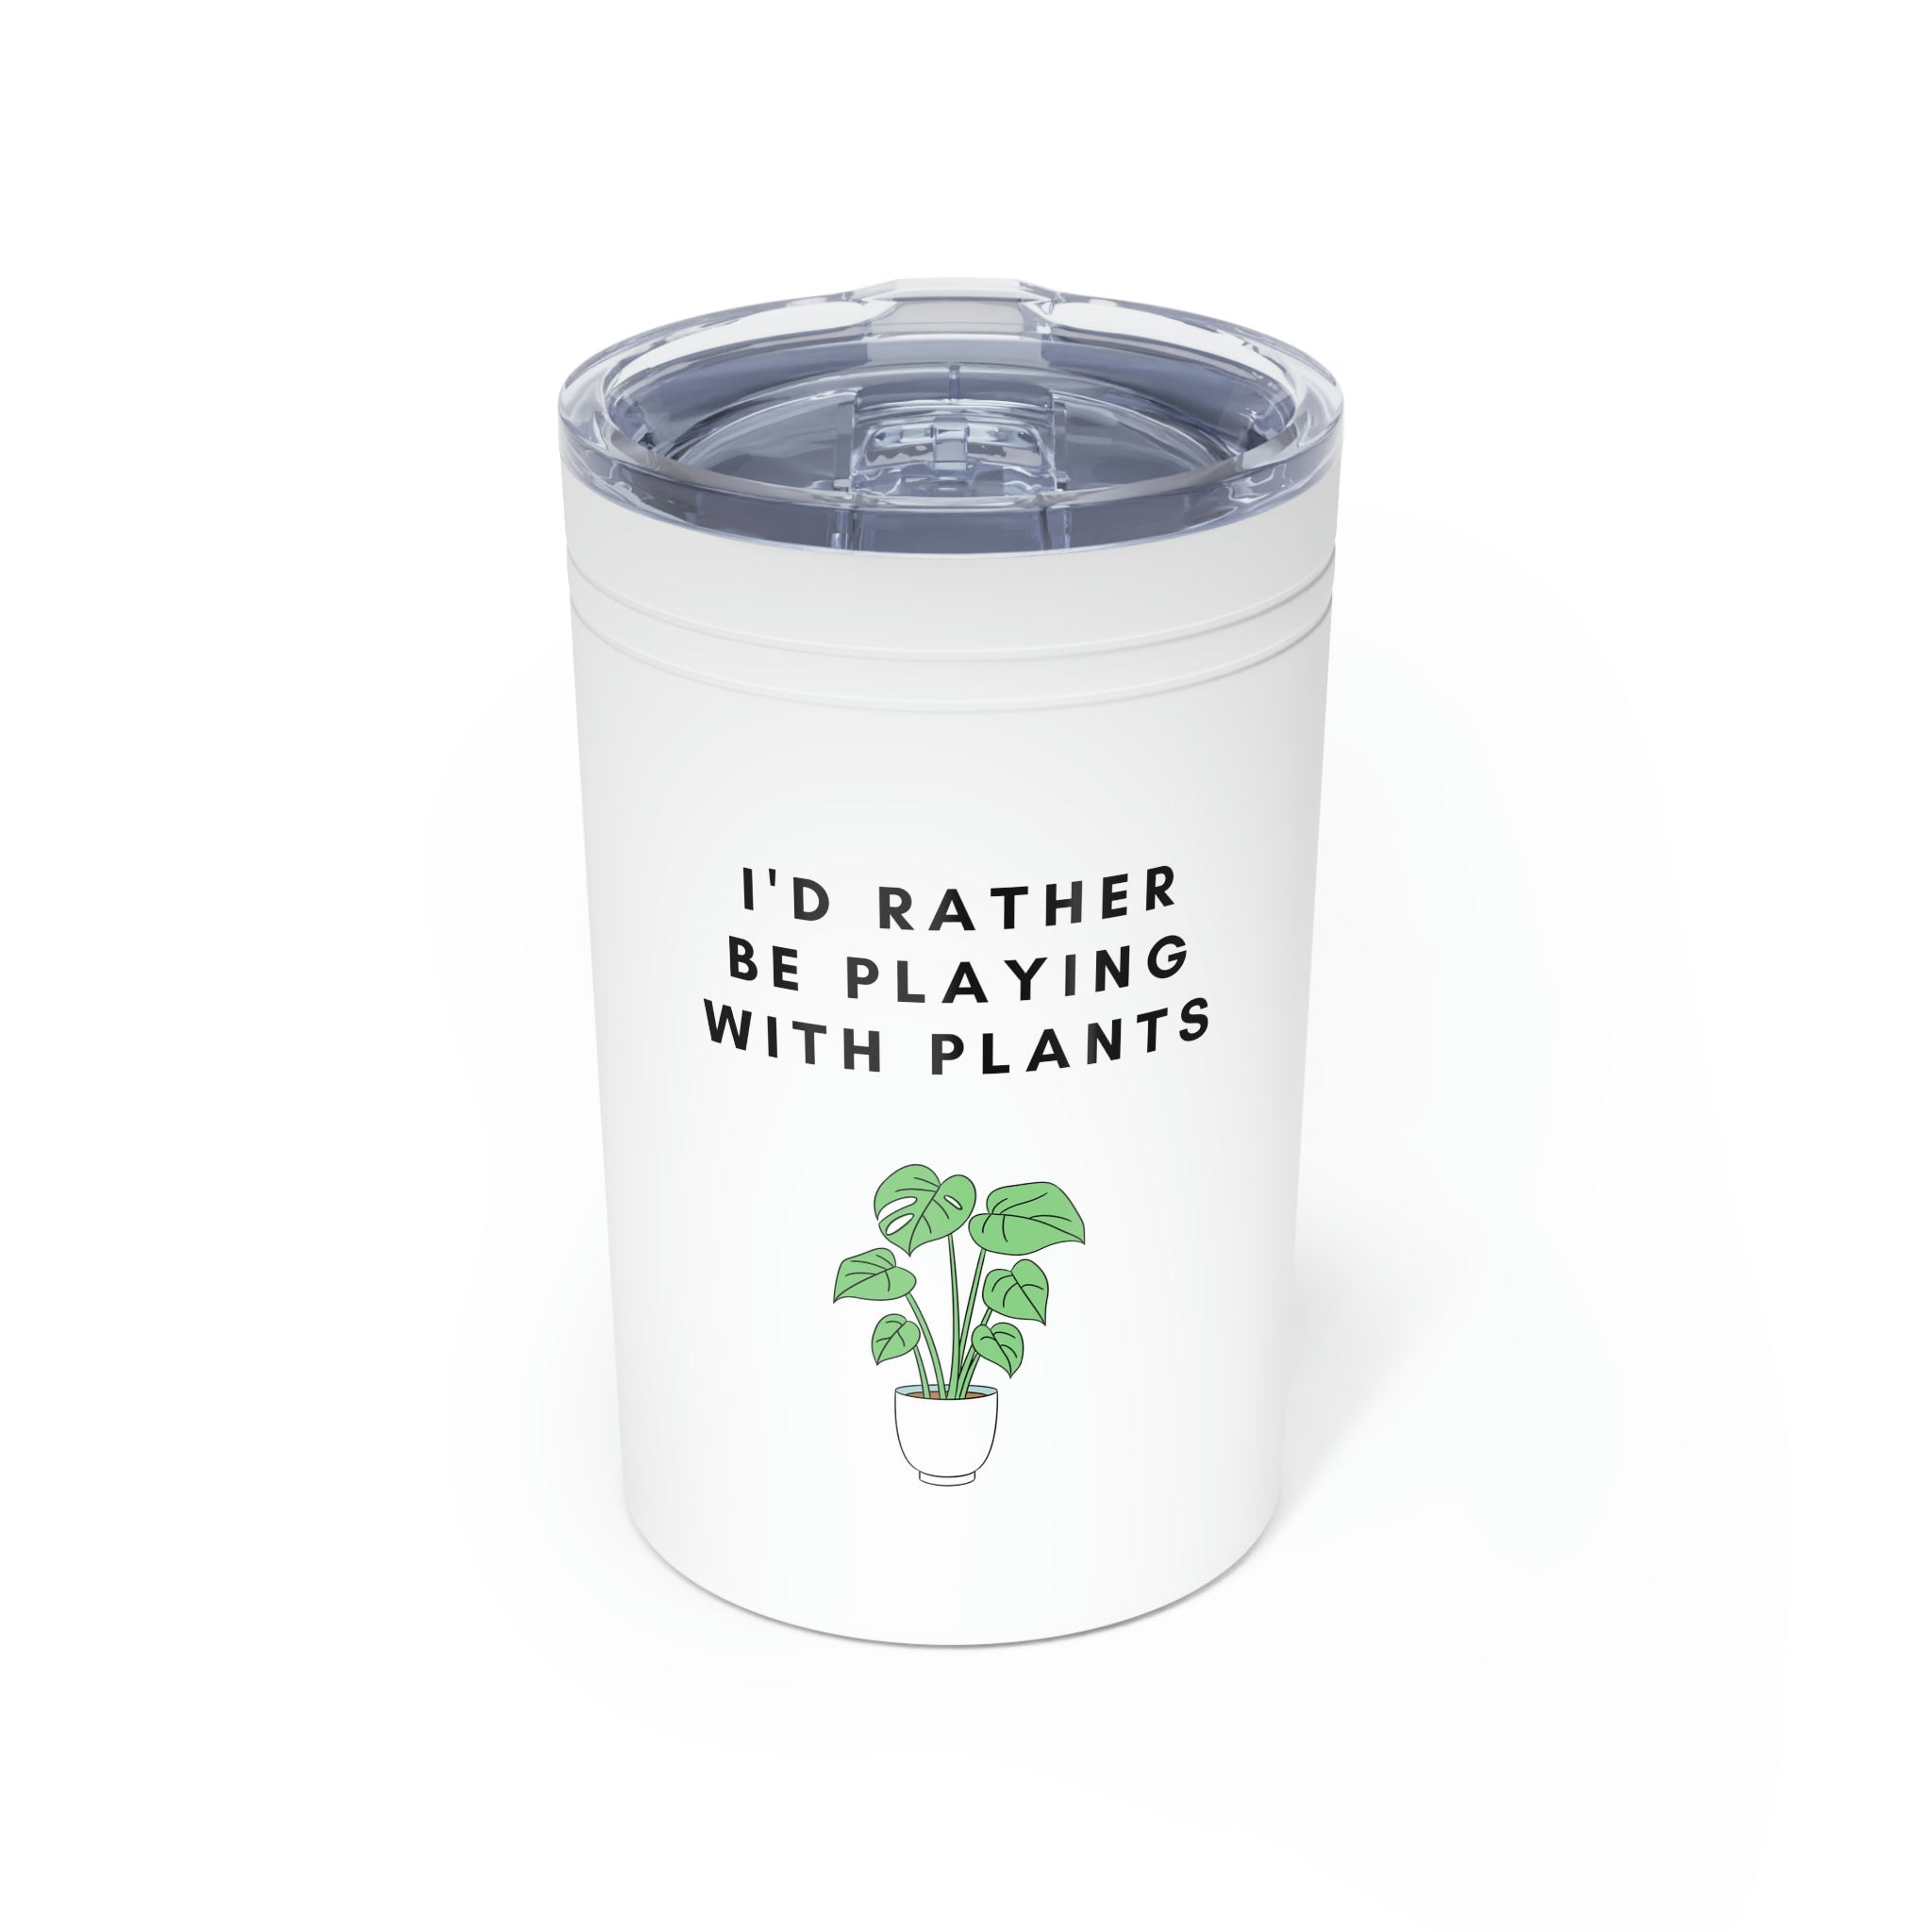 "I'D RATHER BE PLAYING WITH PLANTS" Vacuum Insulated Tumbler, 11oz